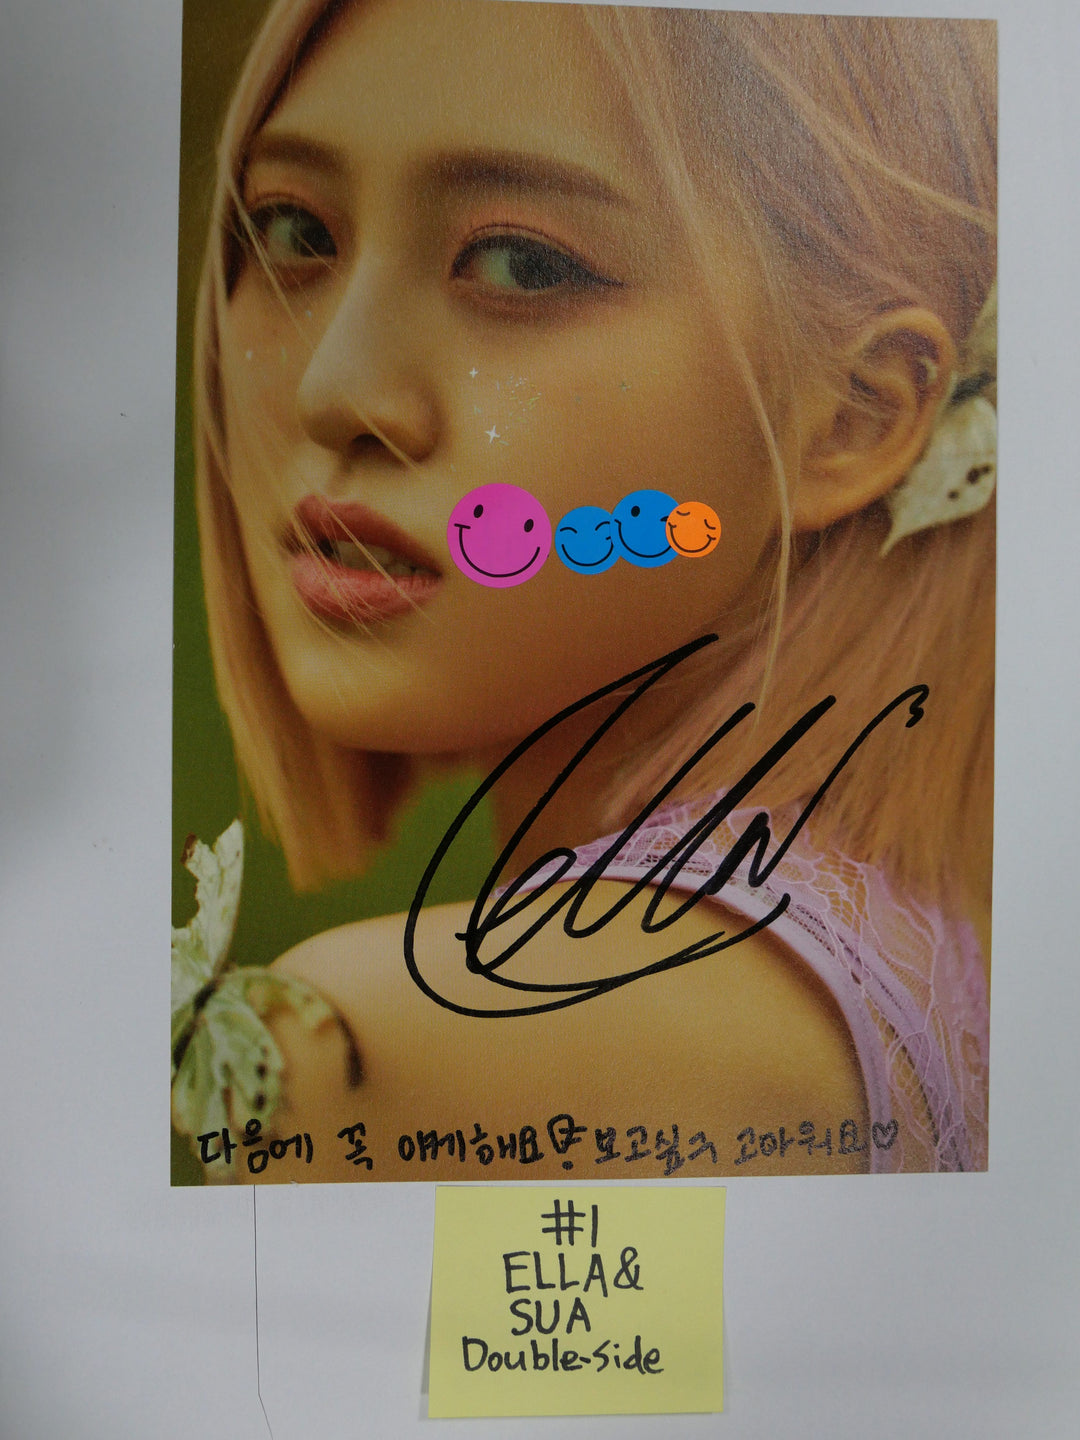 Pixy 'Bravery' - A Cut Page From Fansign Event Albums